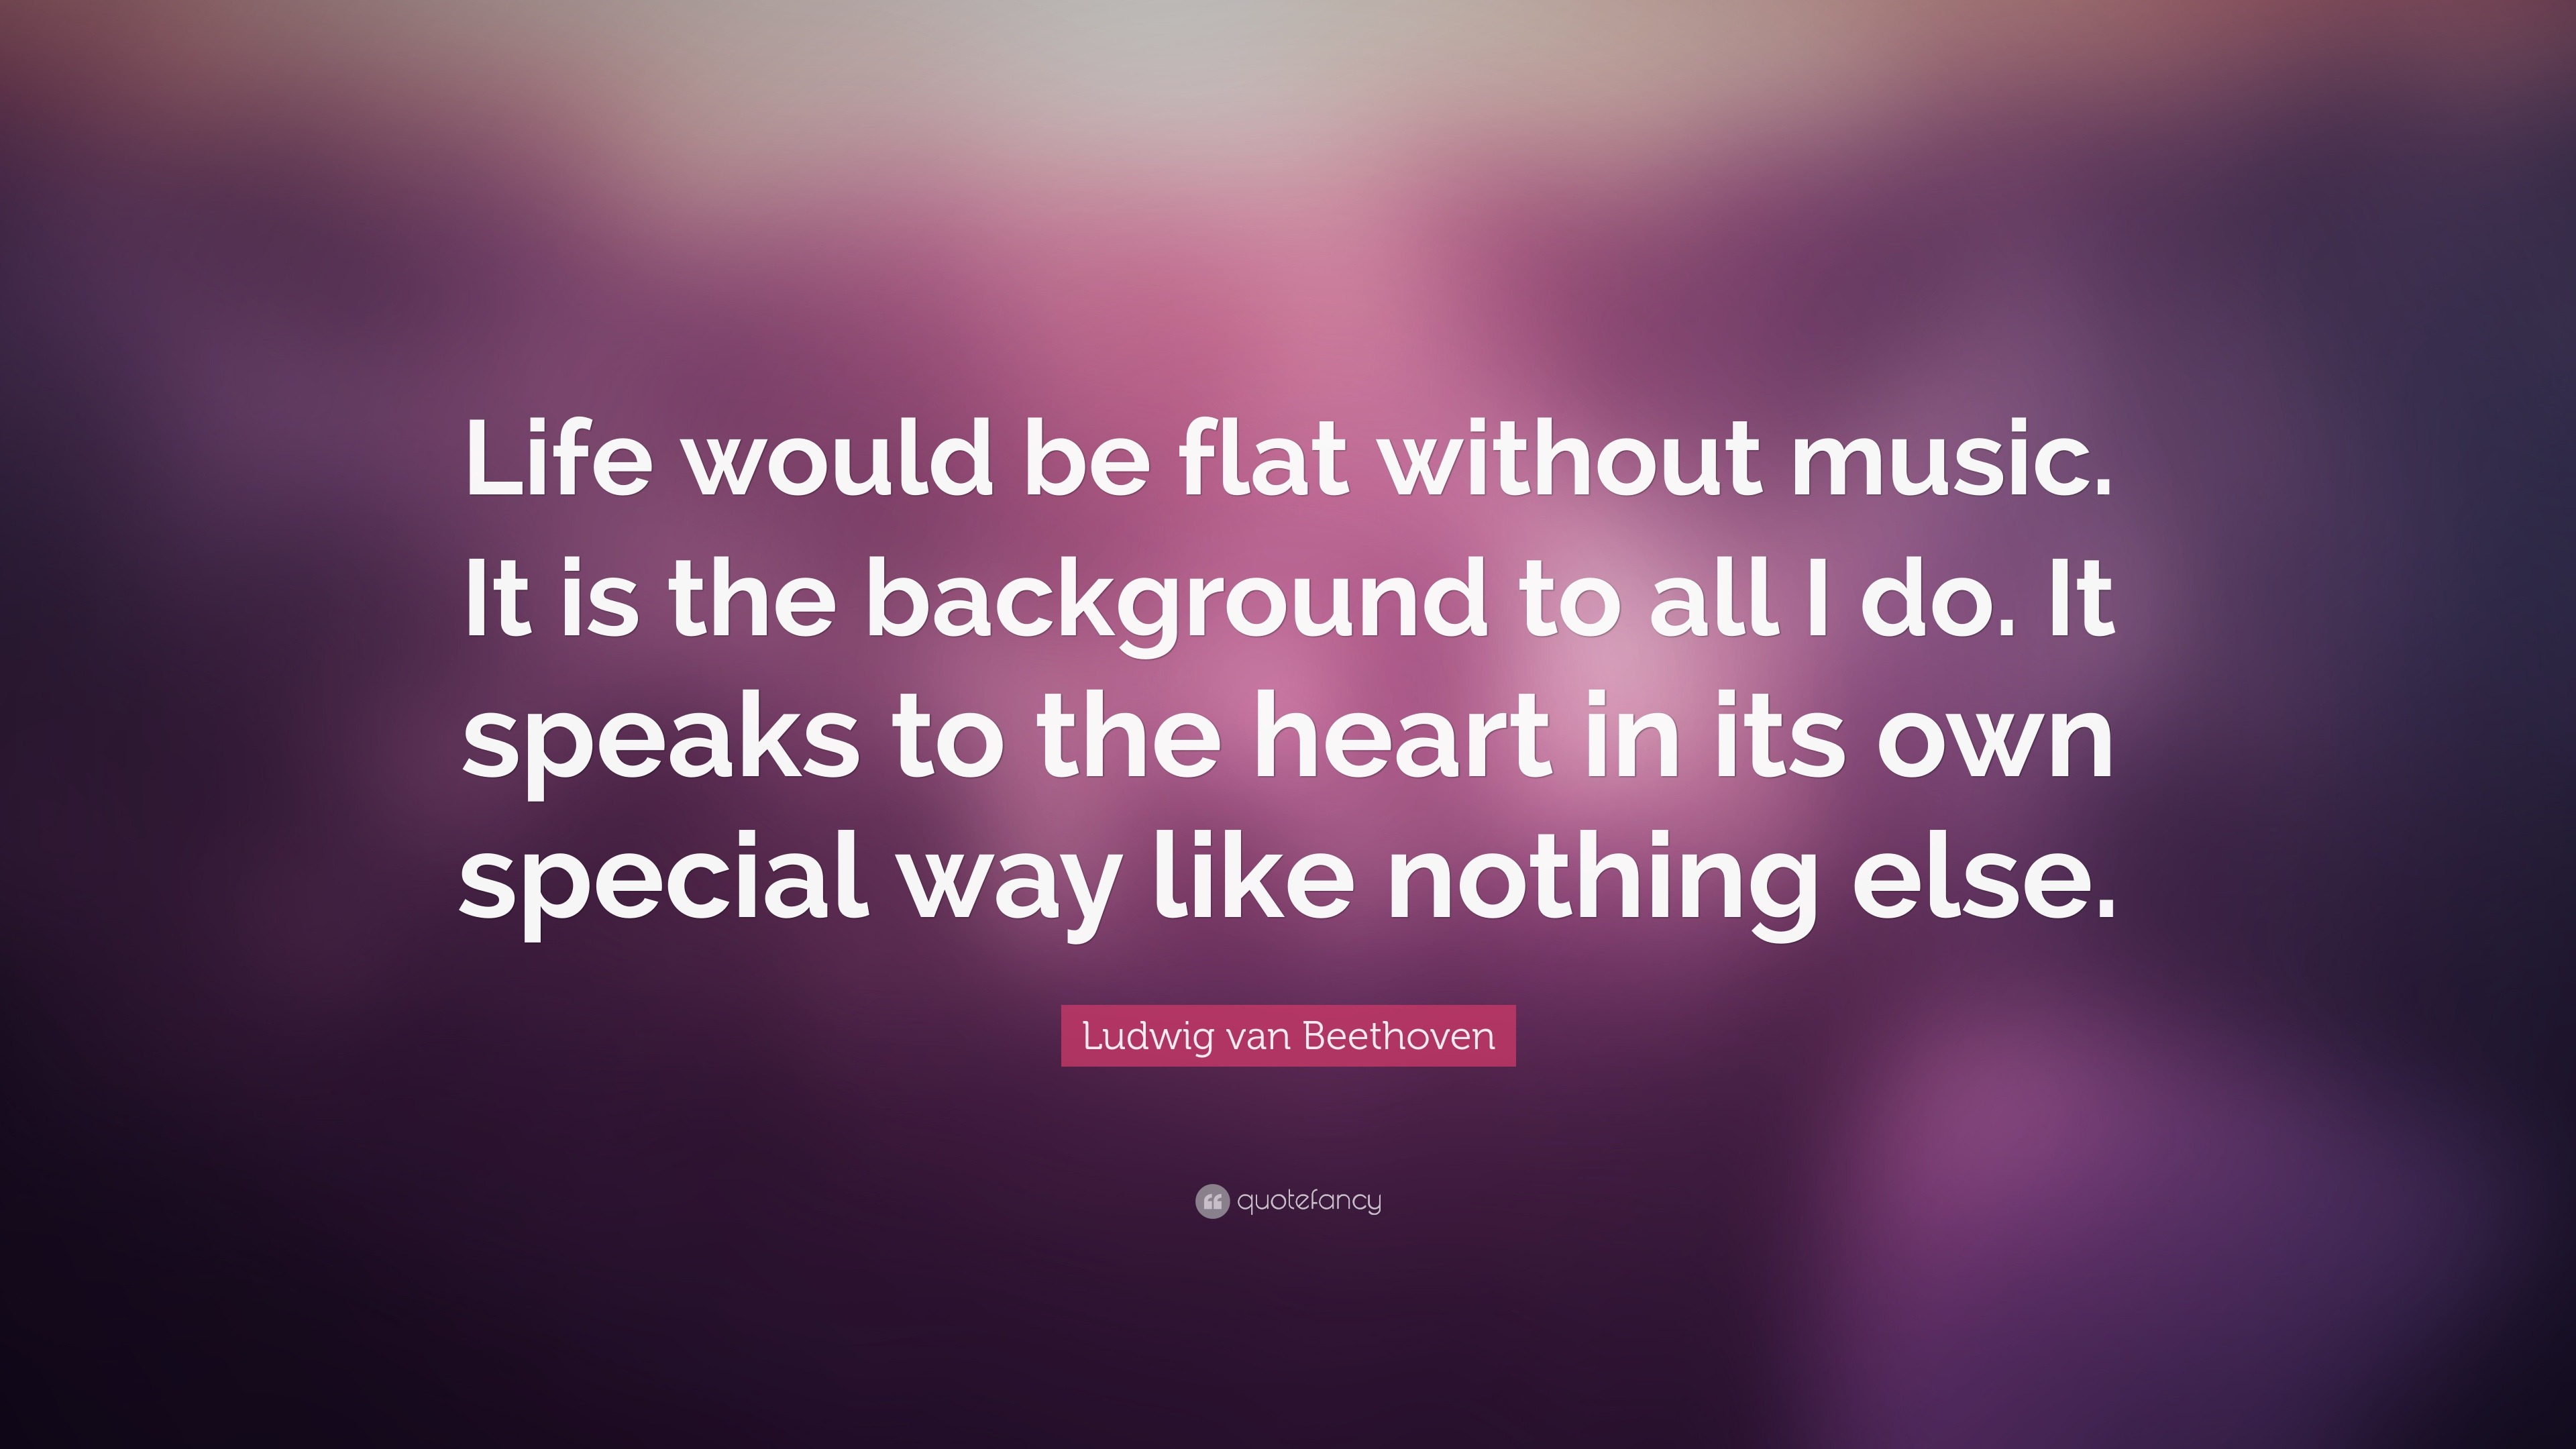 Ludwig van Beethoven Quote “Life would be flat without music It is the